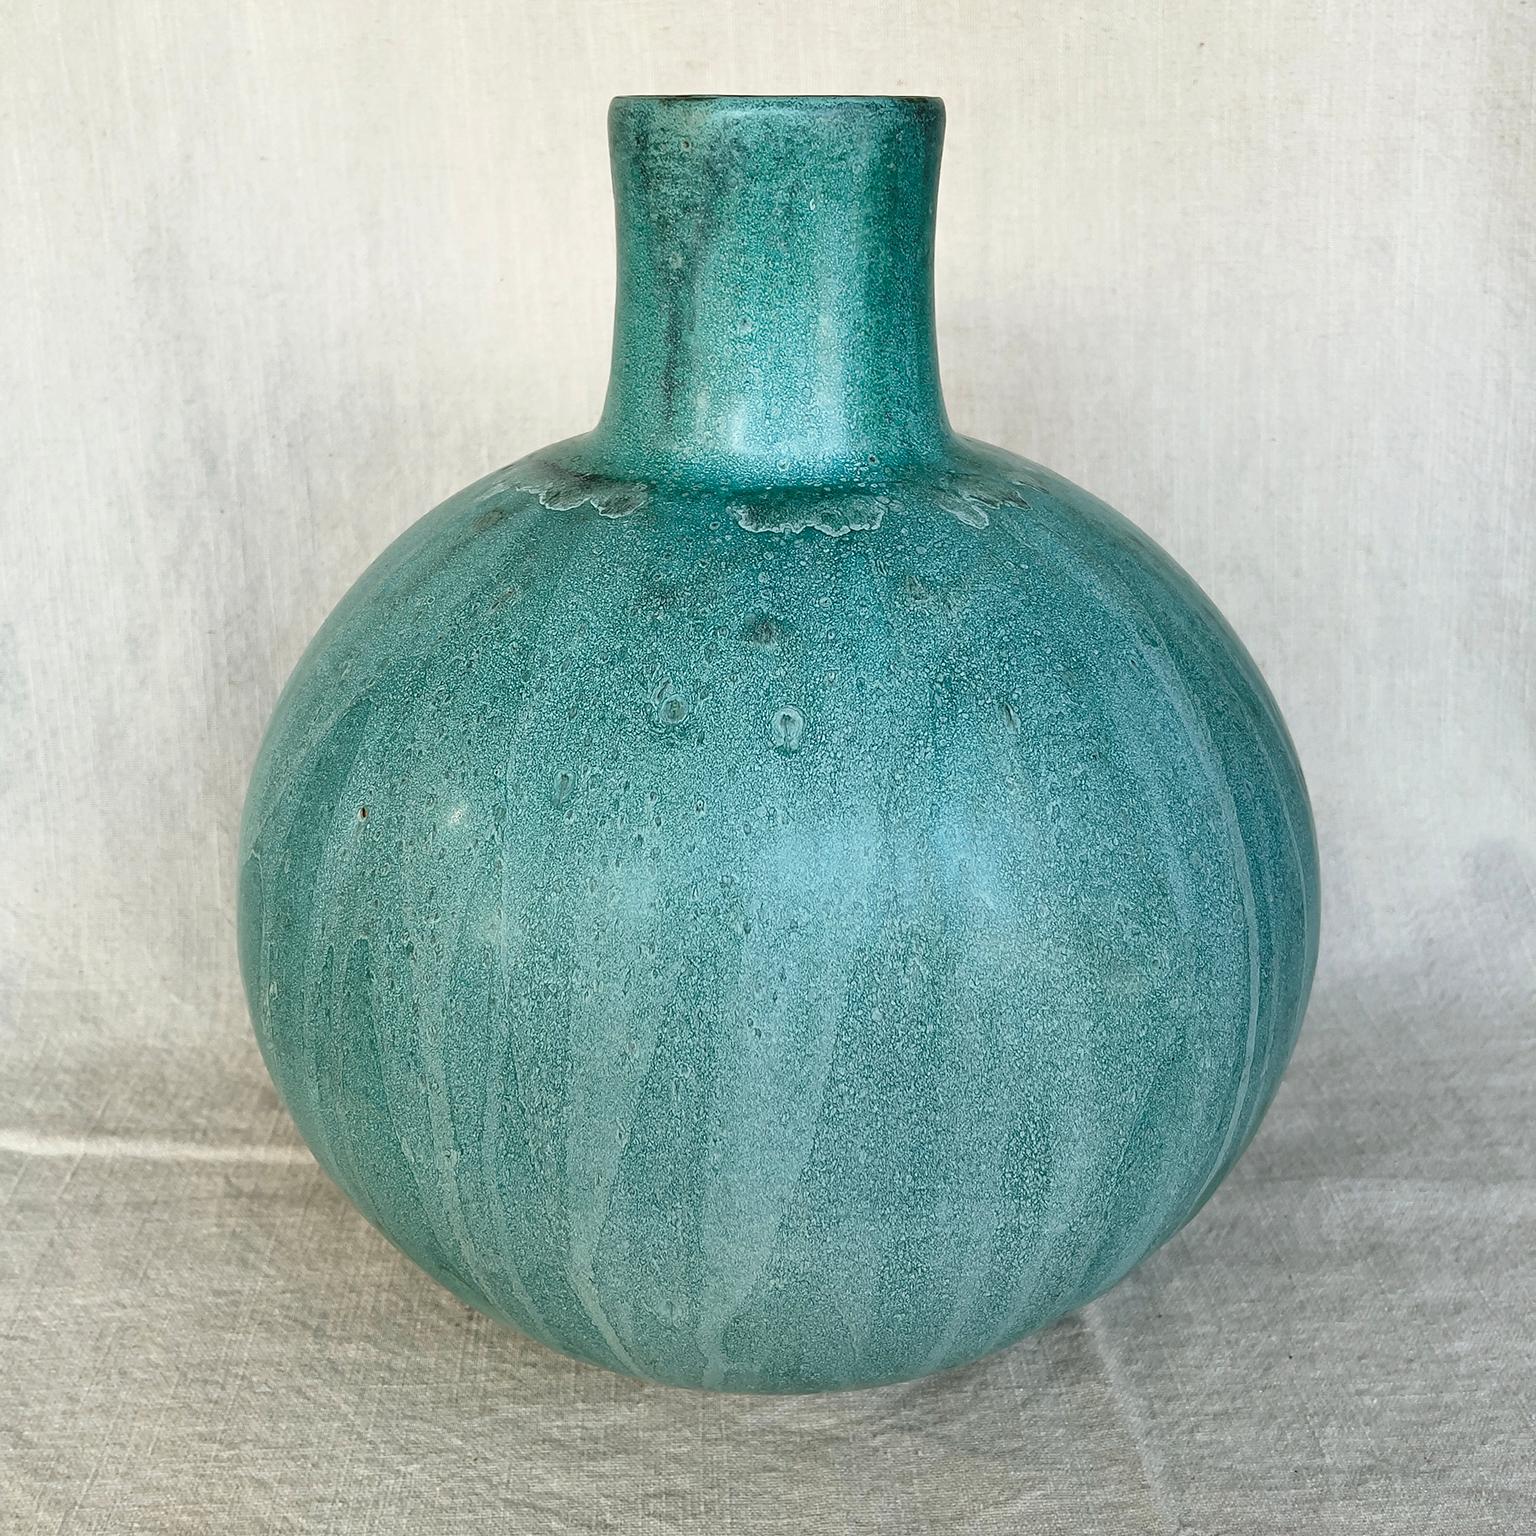 American Thom Lussier Ceramic Vessel #4, from the Oxidized Copper Collection